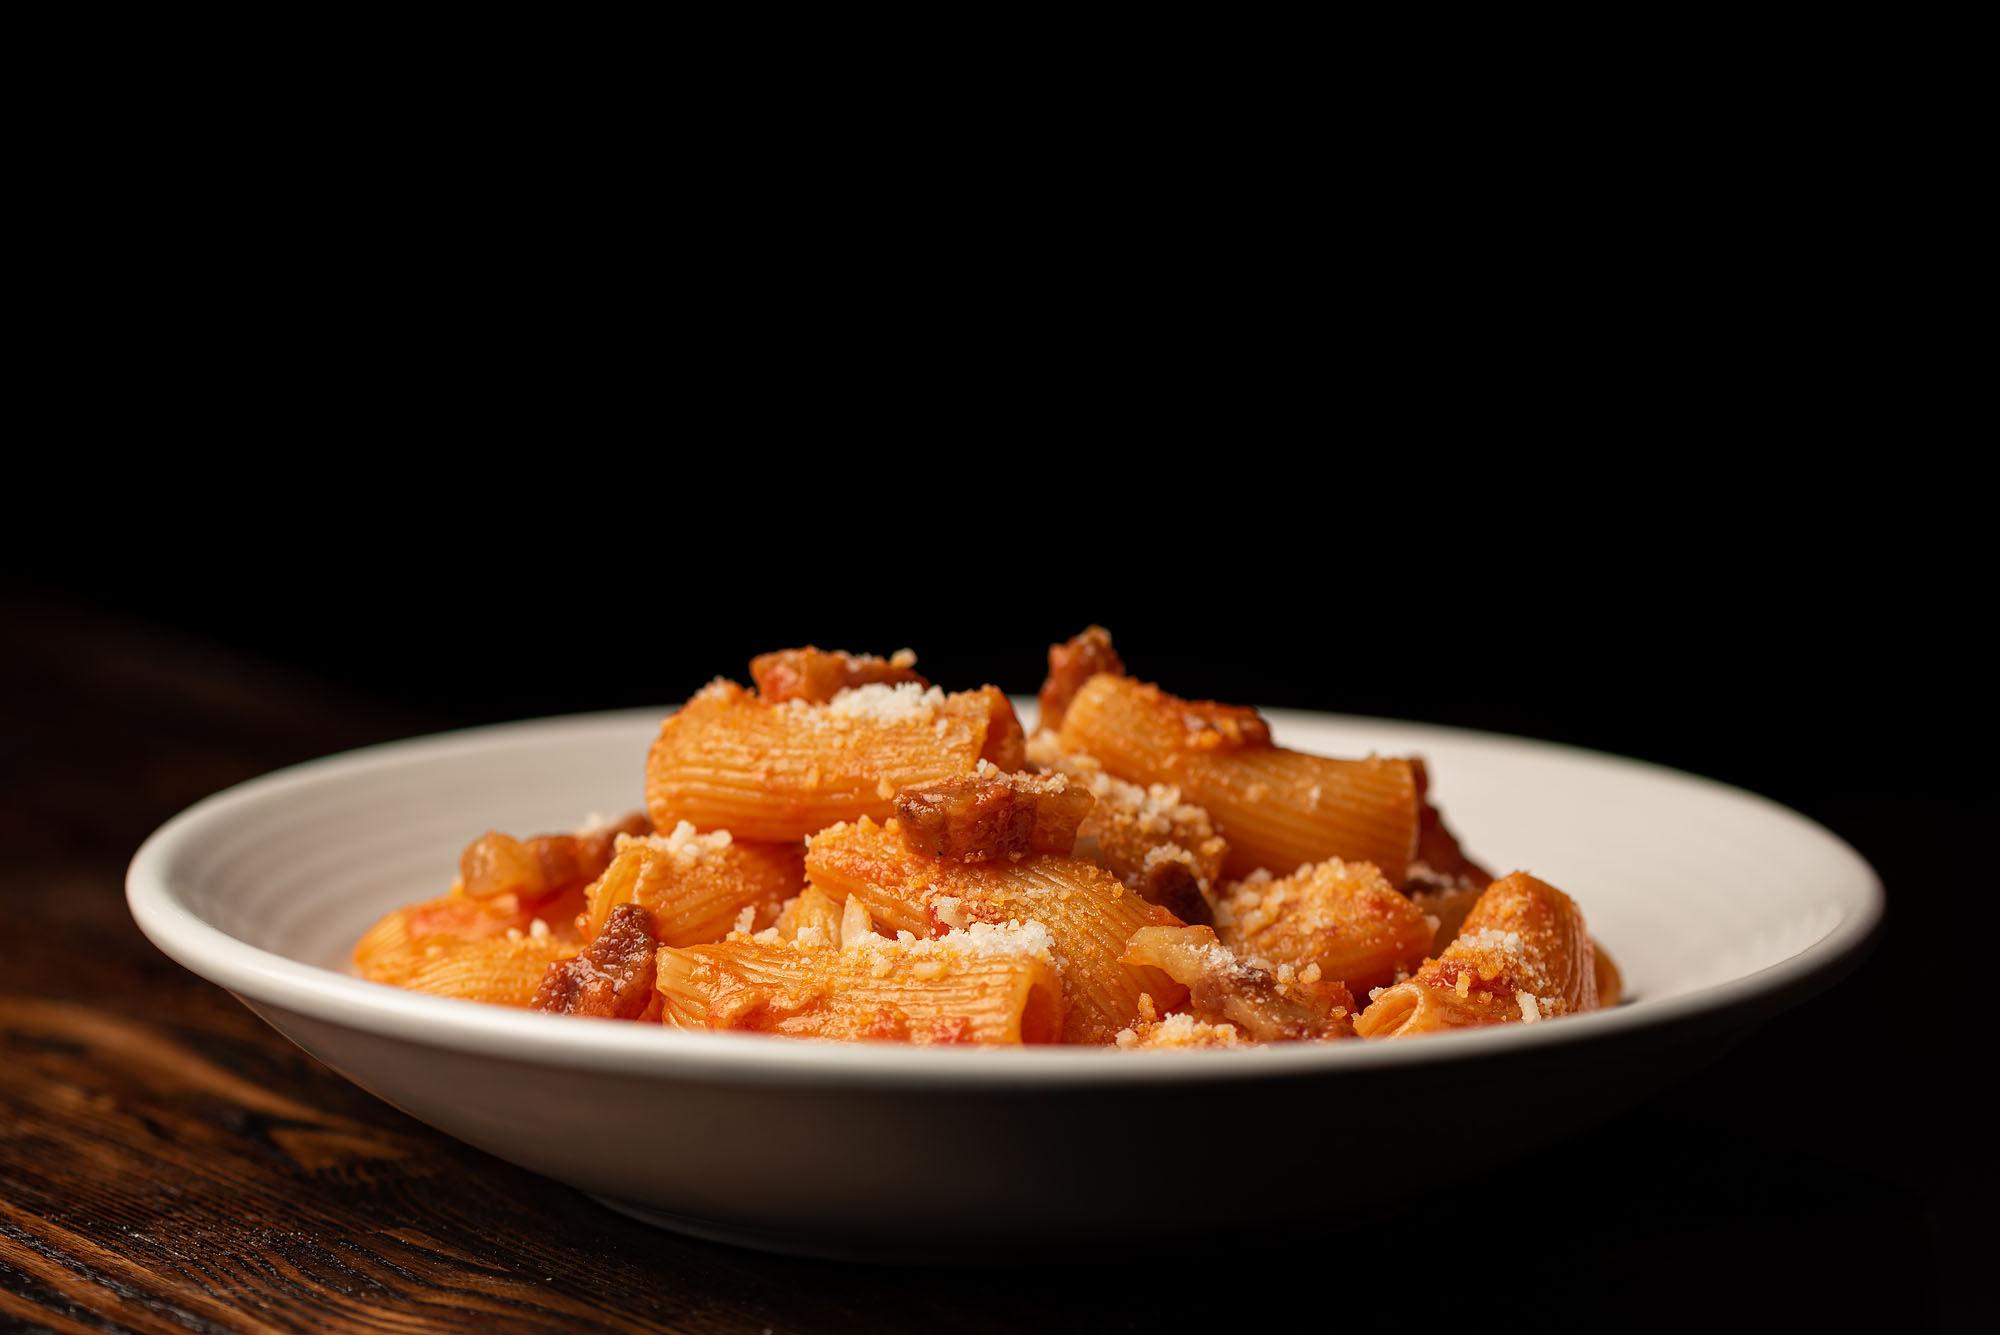 Rigatoni amatriciana at Fingers Crossed, shown in a dark room and from the side, inside a round white plate.